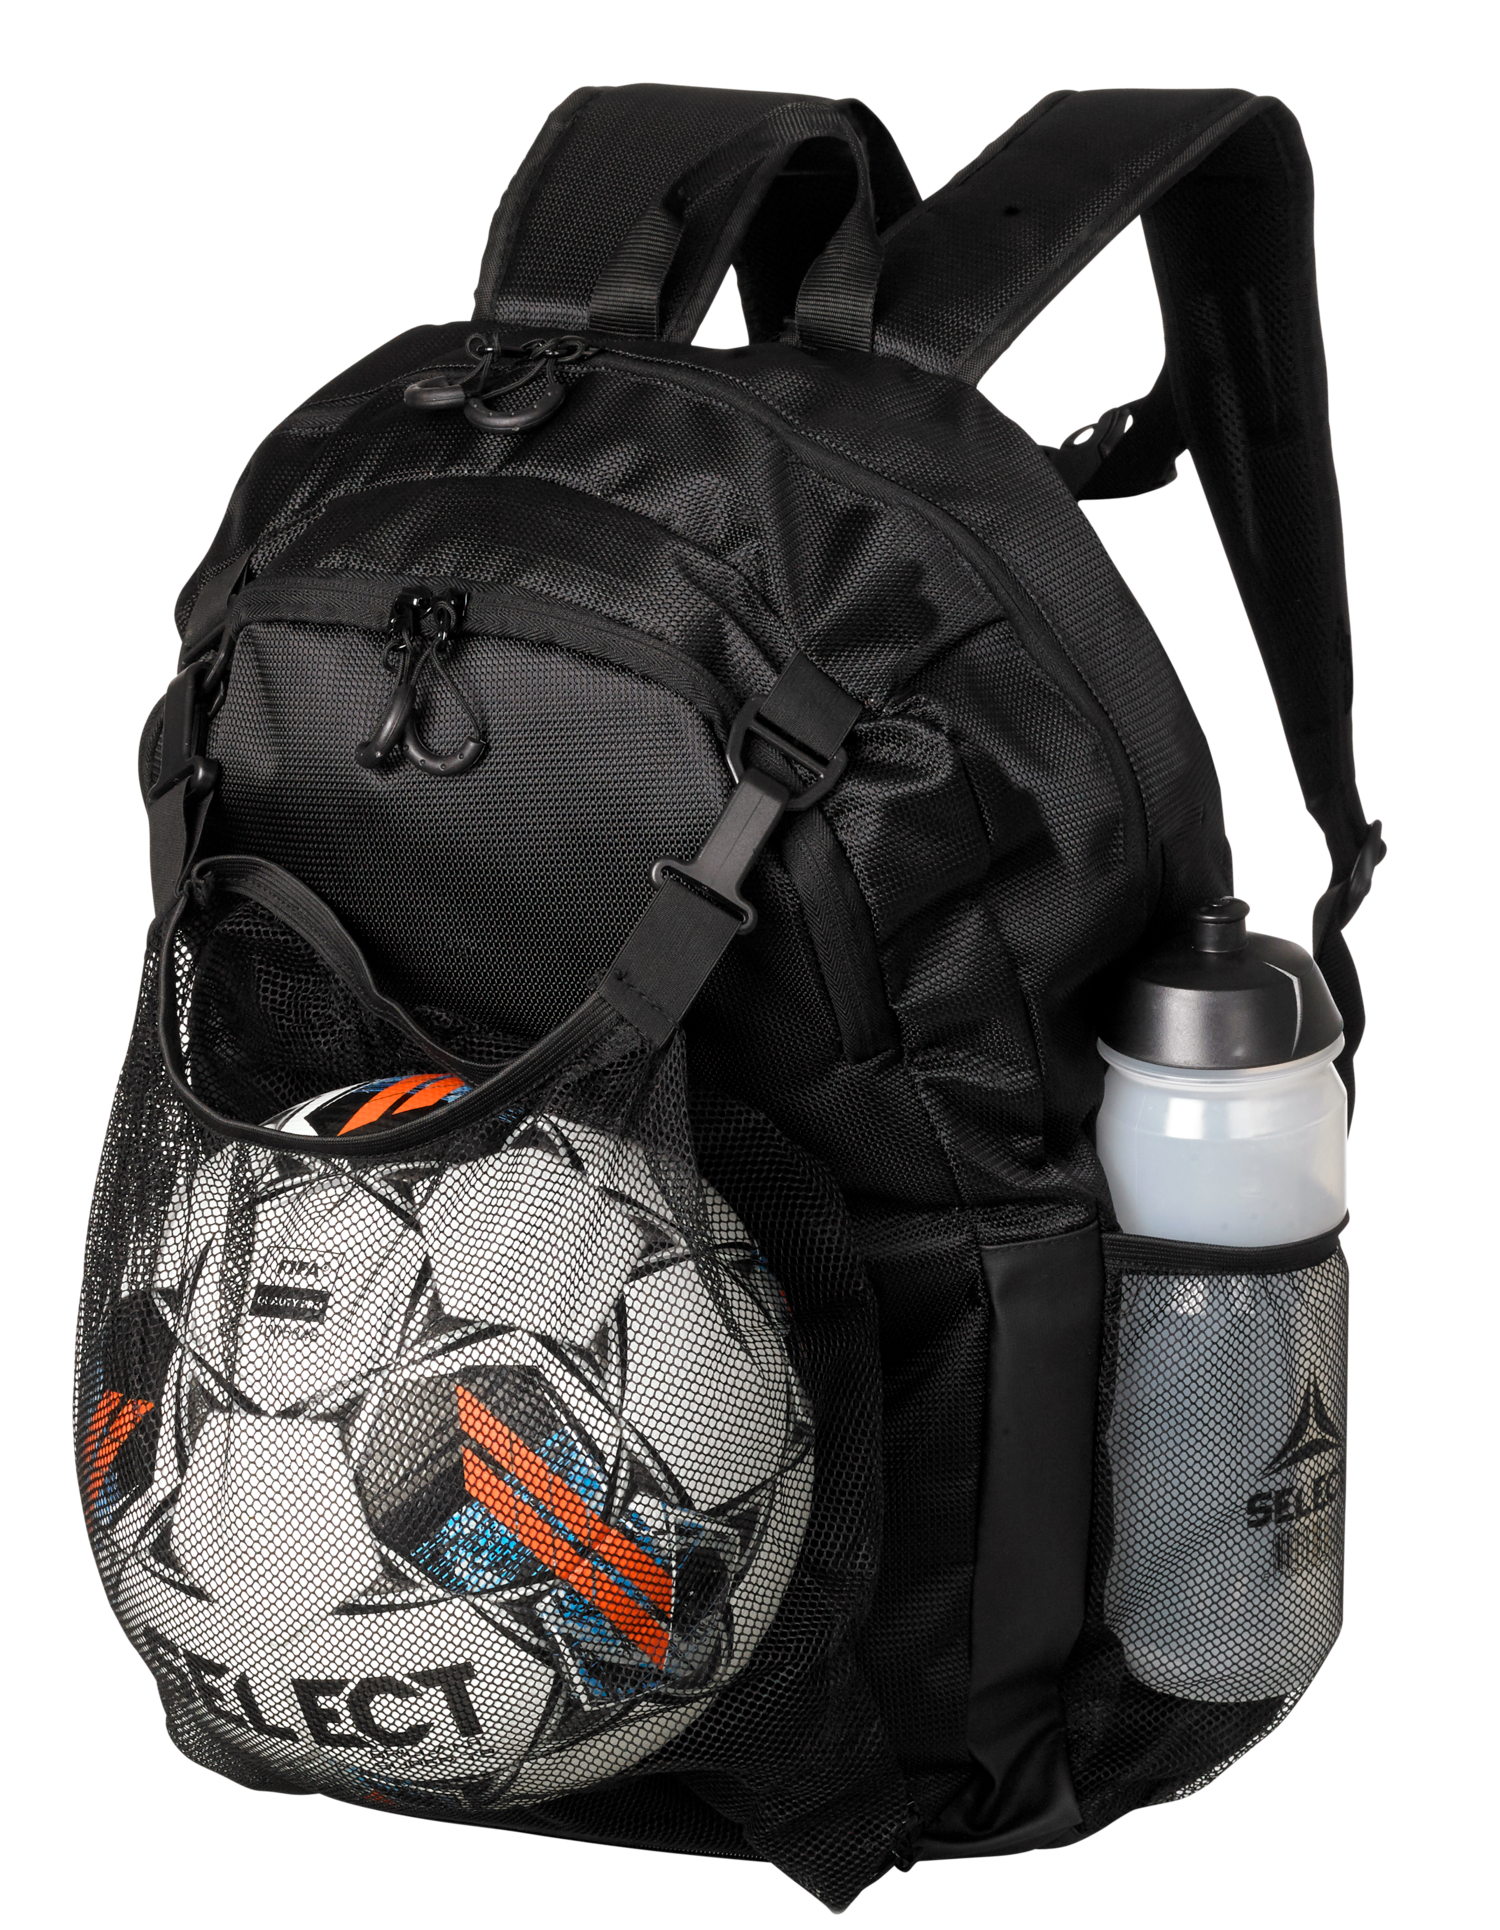 BACKPACK MILANO W/NET FOR BALL